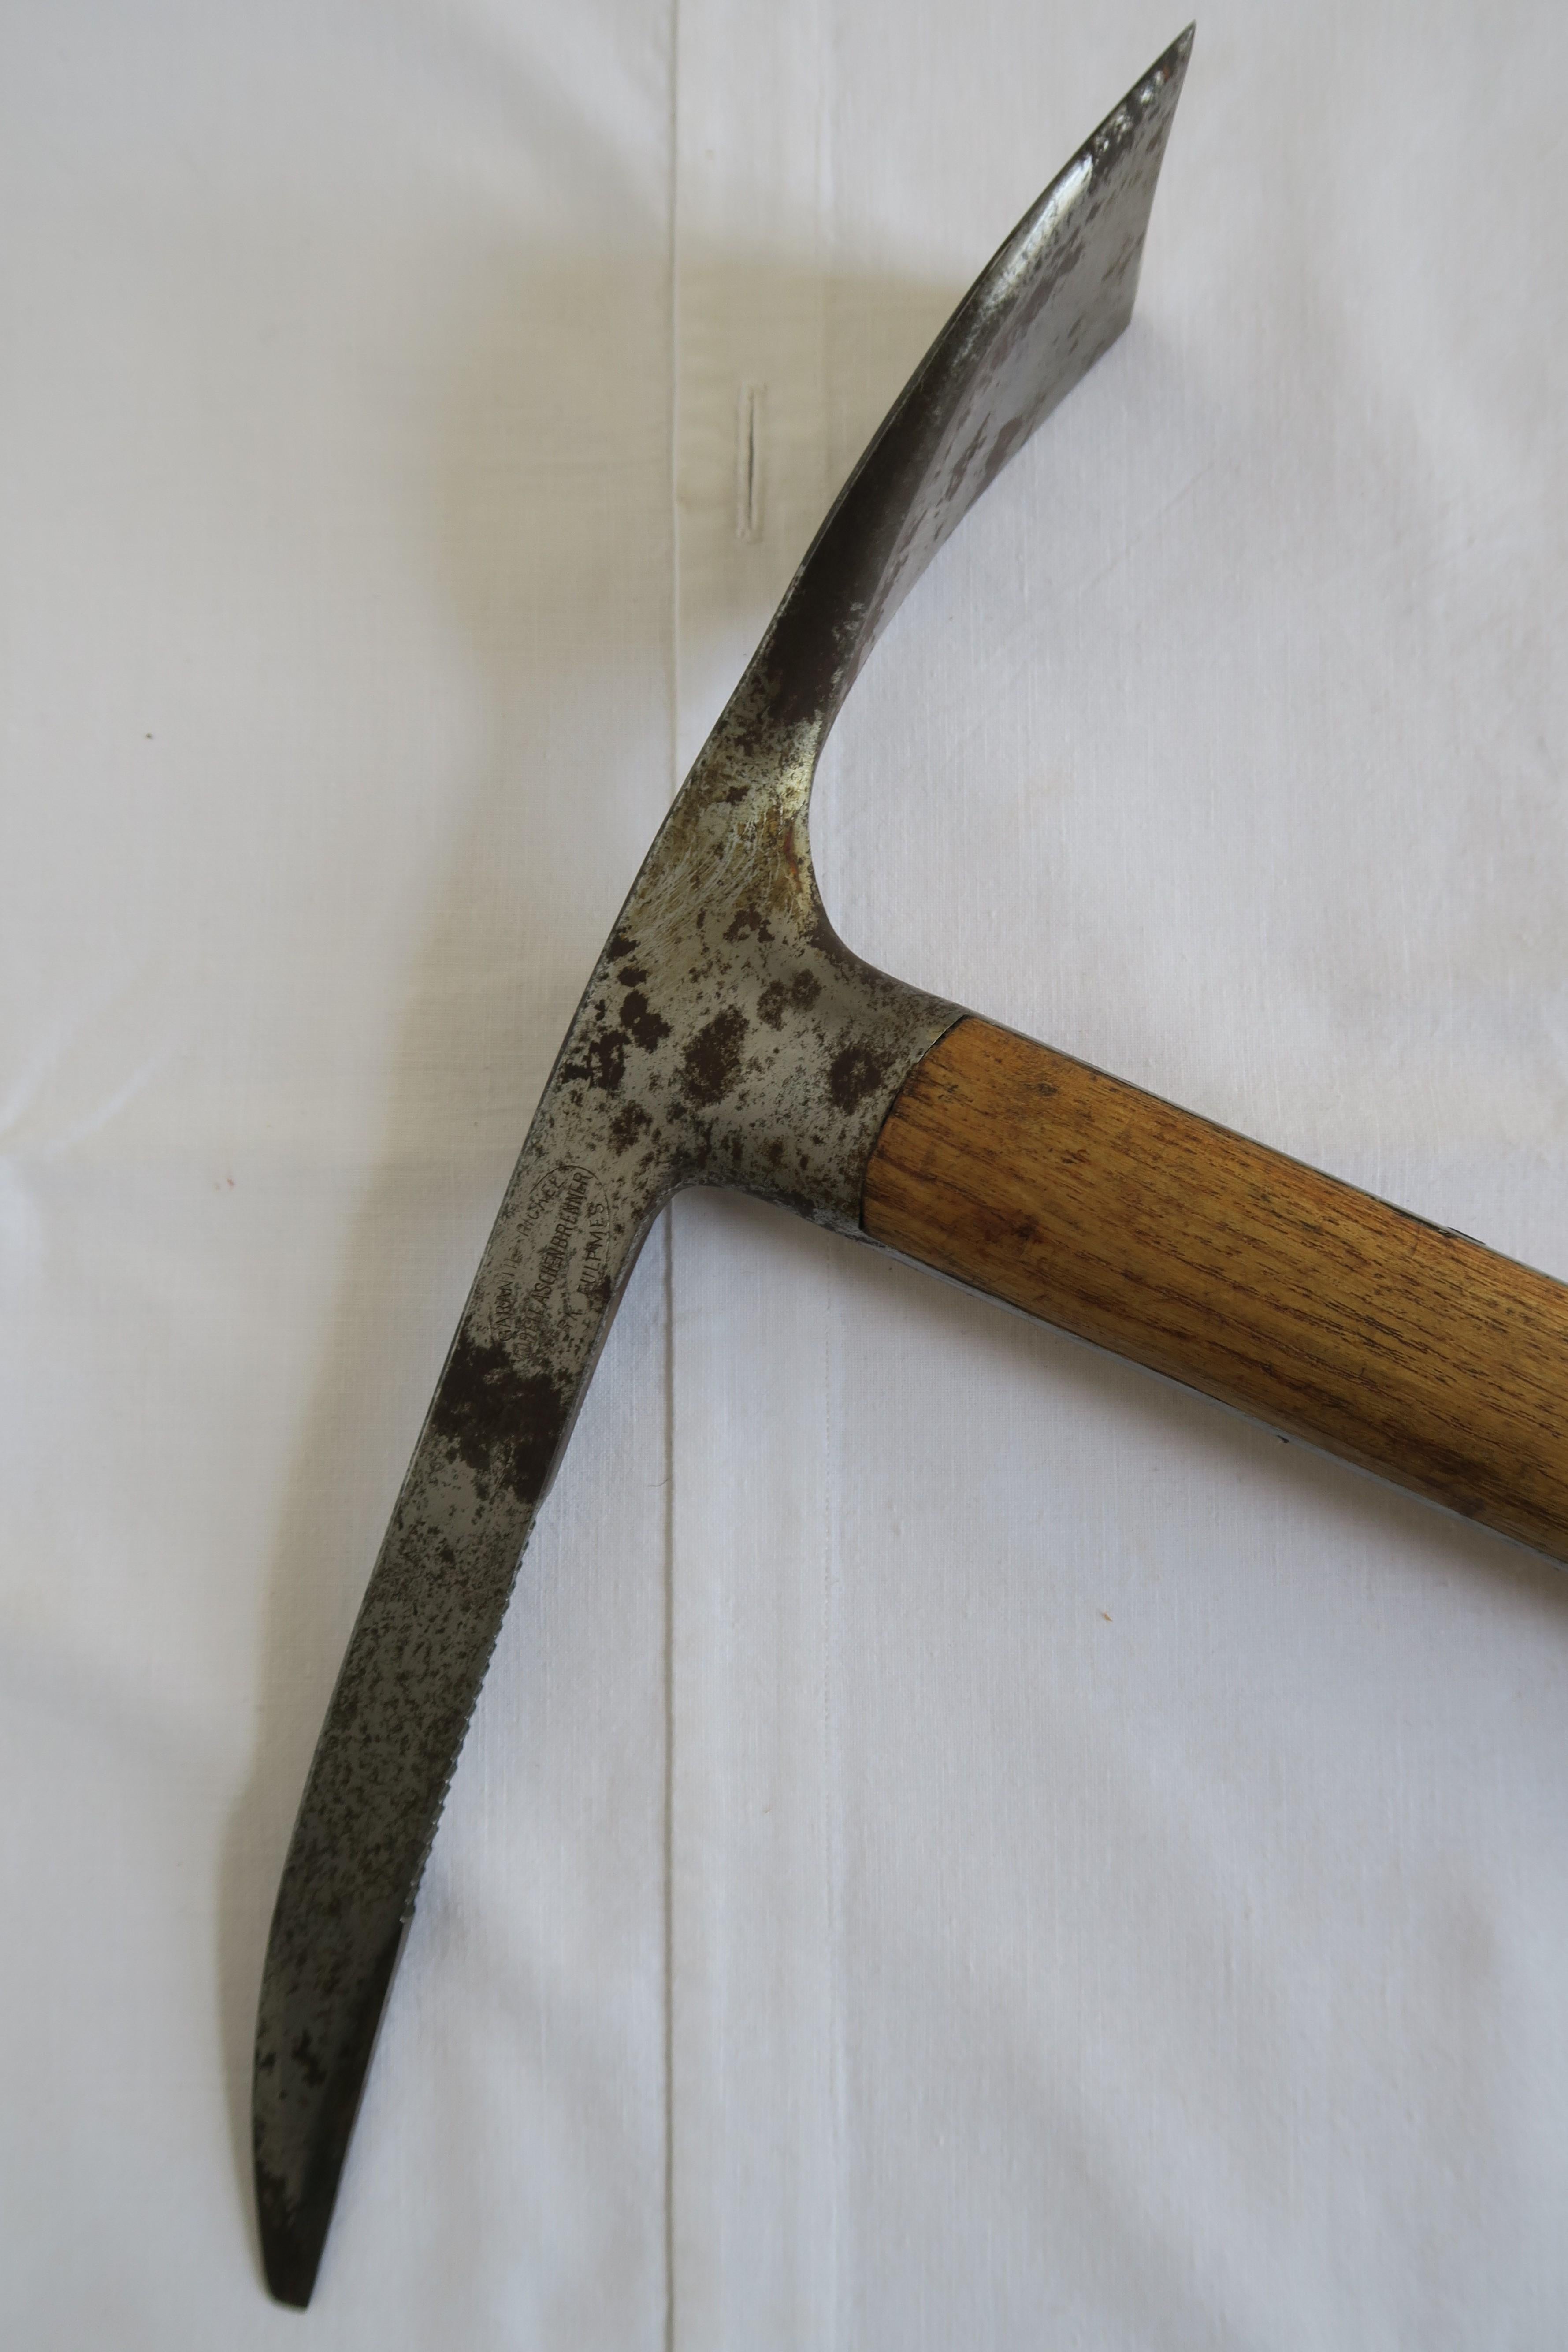 In this advertisement you find a very special object. For sale is a historic early 19th century ice ax produced for and used by the Austrian K+K Monarchy. It is in unbelievably good condition. The handle is made from sturdy light wood, both ends